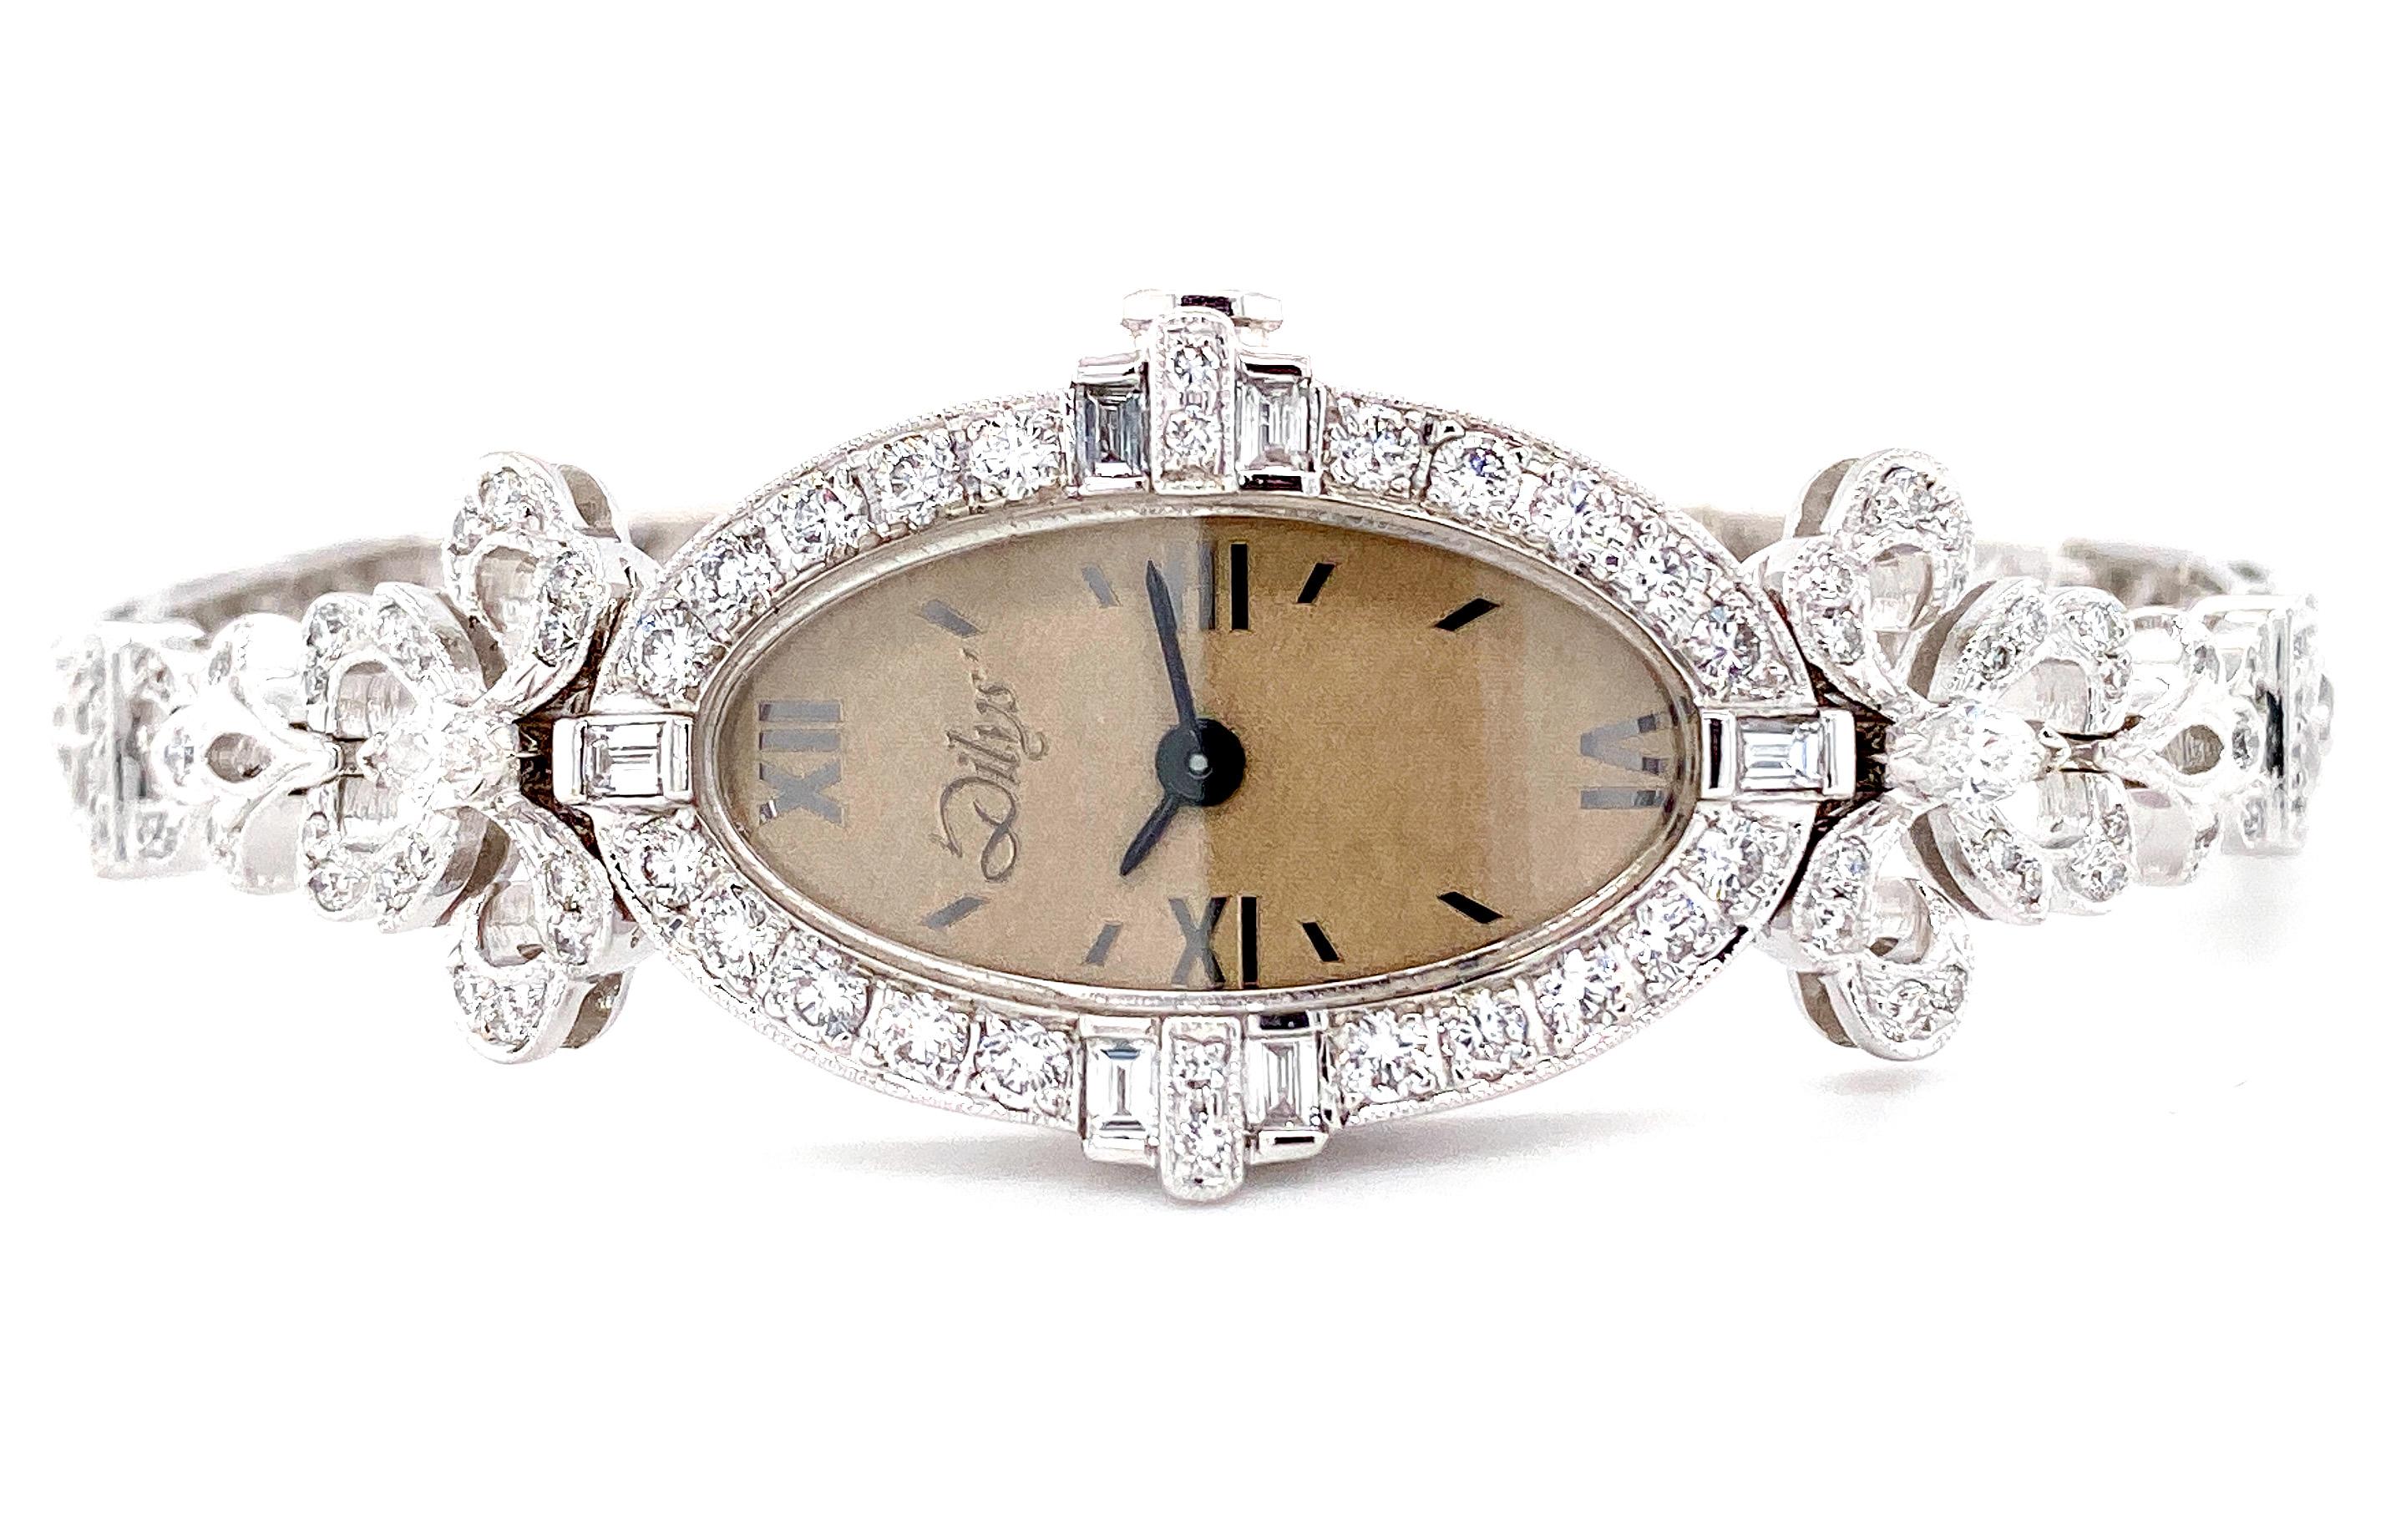 Inspired by the Art Deco movement, Dilys’ exceptional Swiss quartz movement diamond watch in 18 karat gold exhibits beautiful intricacy with detailed cutouts and outlines throughout. This timepiece speaks for itself and is a work of wearable art.